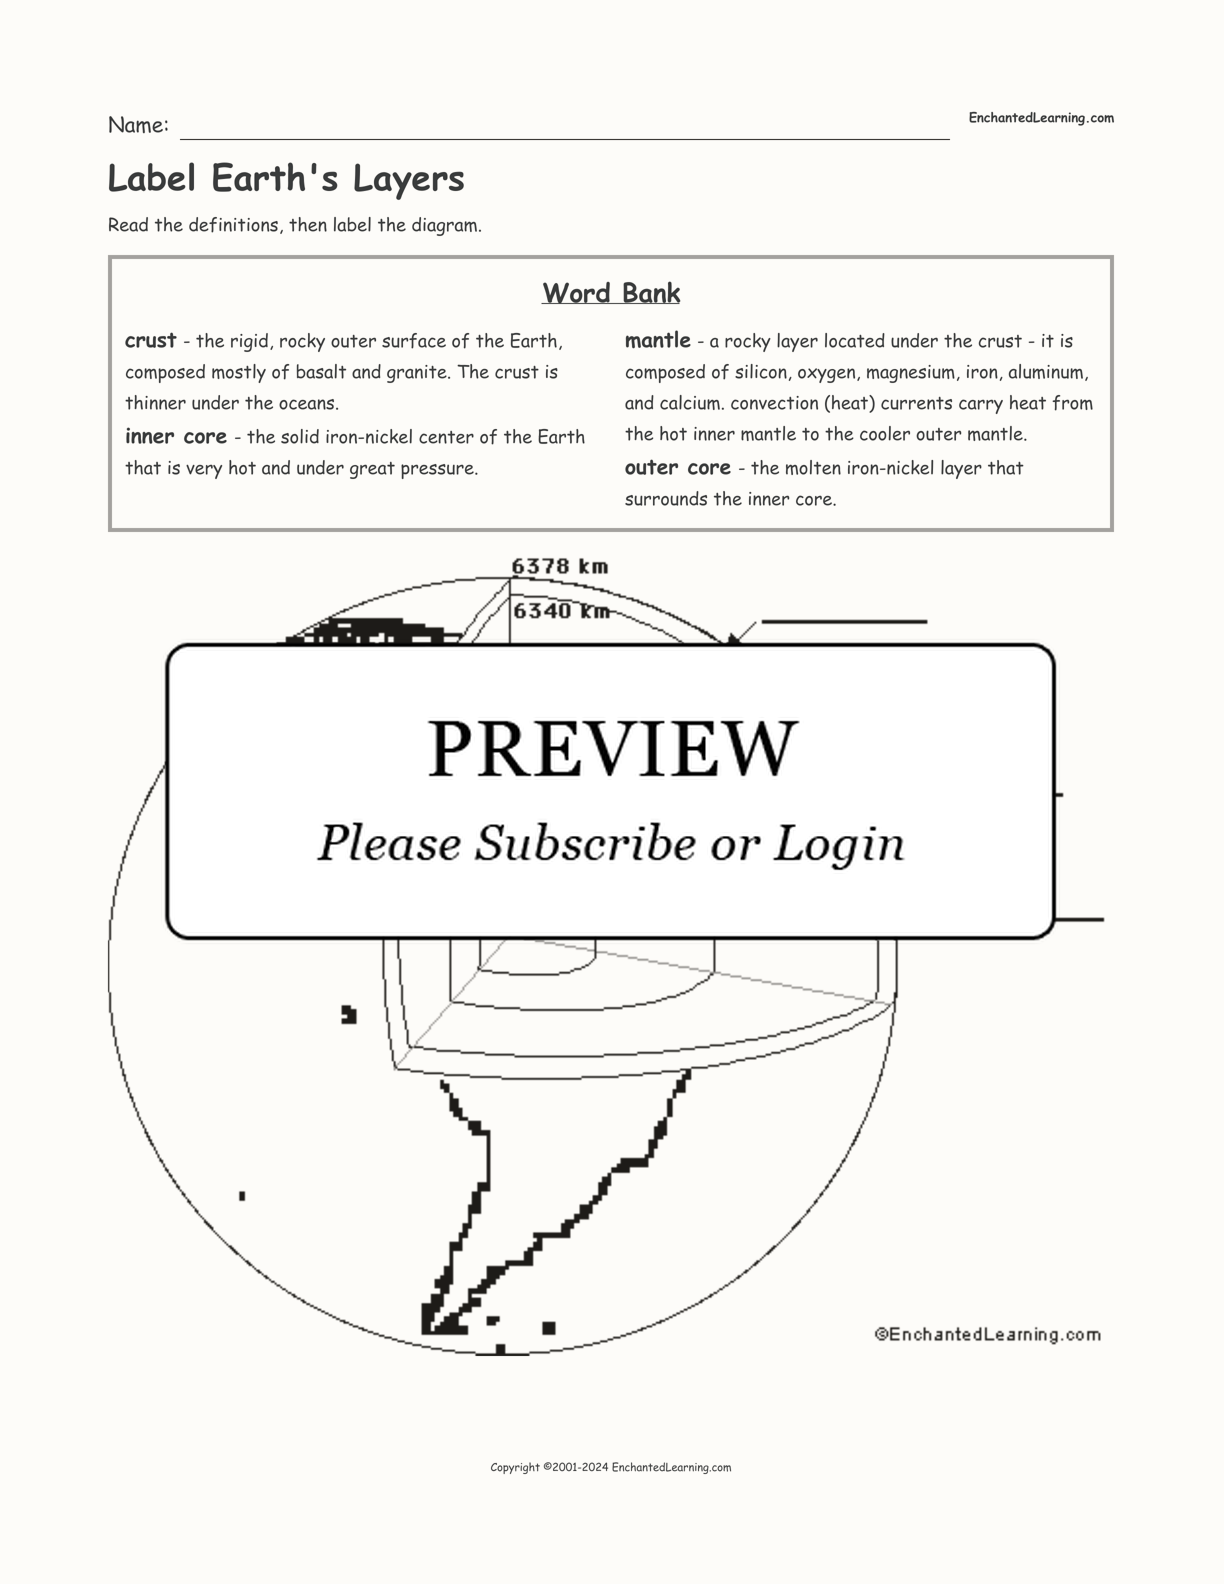 Label Earth's Layers interactive worksheet page 1